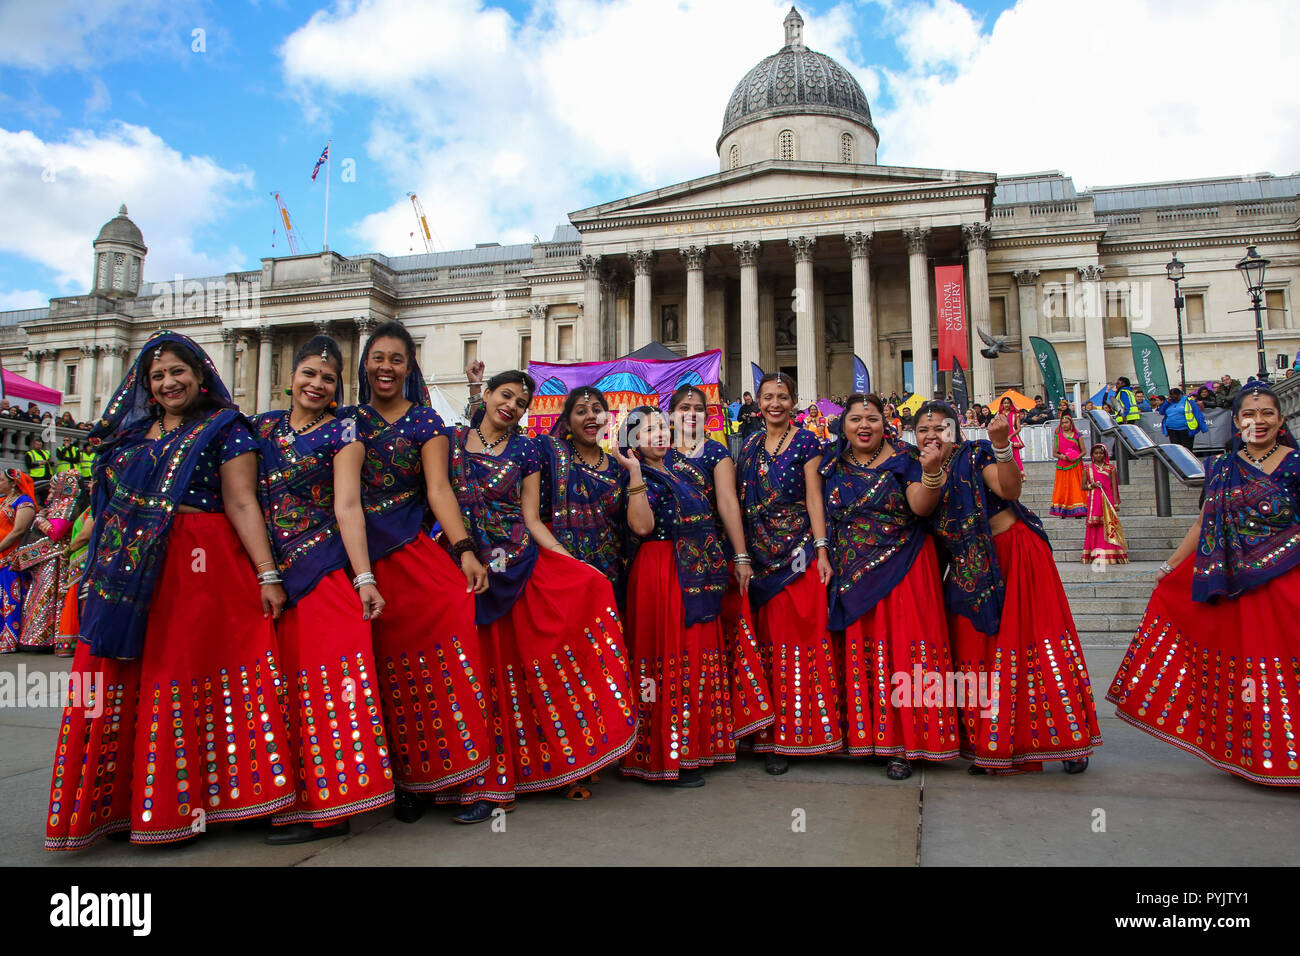 Trafalgar Square, London, UK. 28 Oct 2018 - Performers during the Mass Ghoomar Dance - a traditional Gujarati folk dance of the Bhil tribe performed in worship to Goddess Sarasvati, were the dancers twirling in and out of a wide circle.   Hundreds of Hindus, Sikhs, Jains and people from all communities attend Diwali celebrations in London - festival of light, Diwali in London is celebrated each year with a free concert of traditional religious and contemporary Asian music and dance.  Credit: Dinendra Haria/Alamy Live News Stock Photo